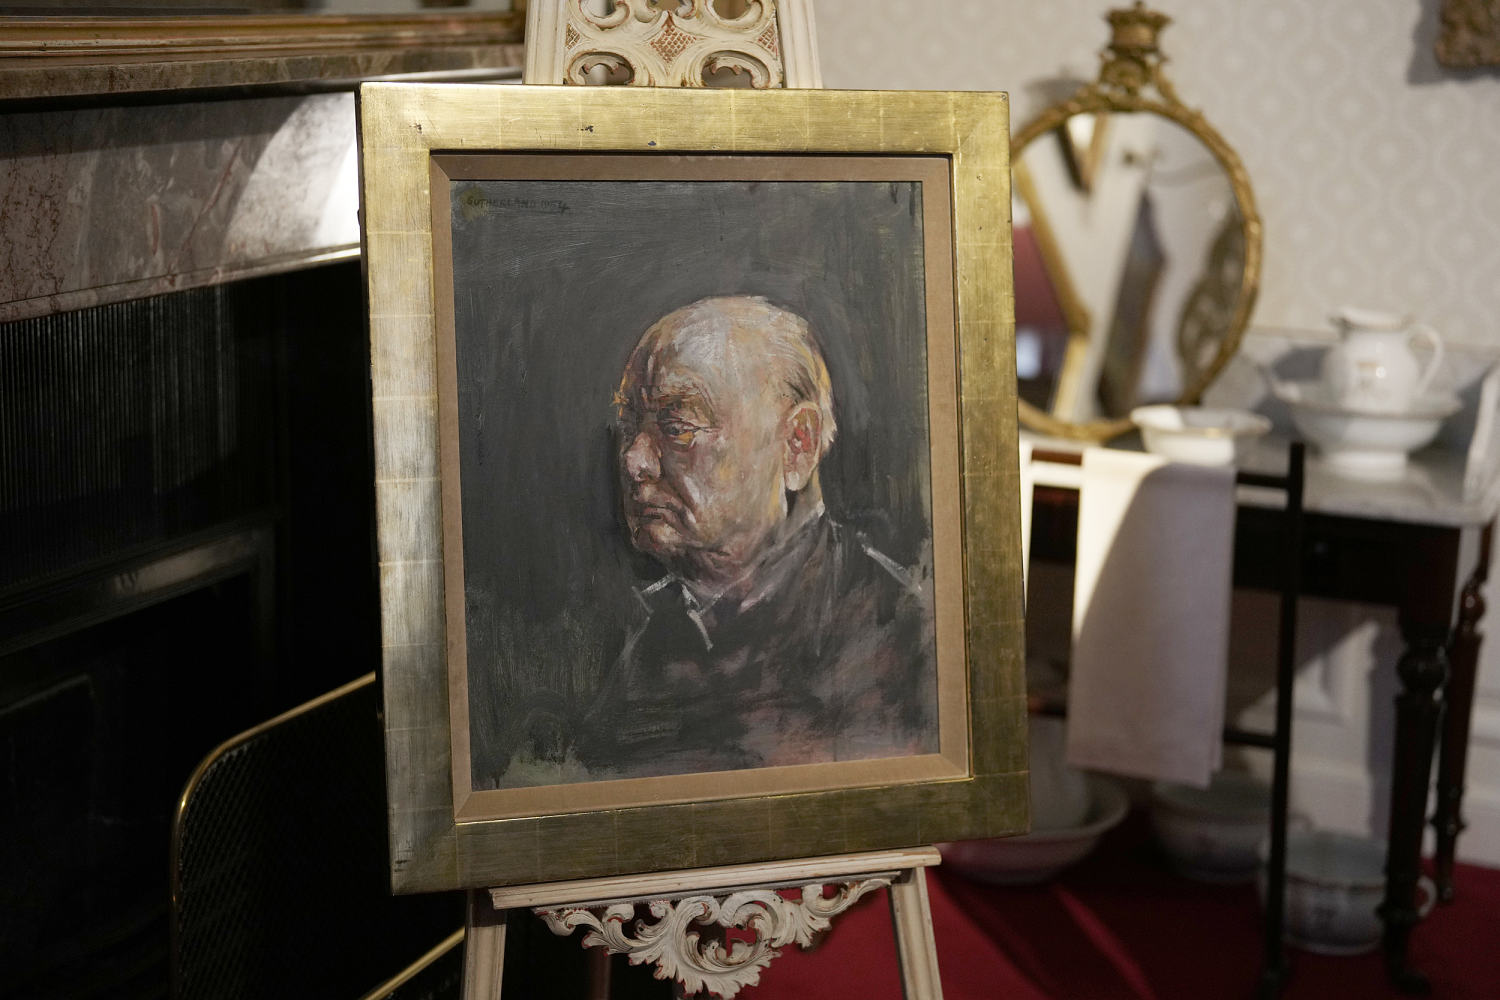 A painting of Winston Churchill by an artist whose work he hated is up for auction